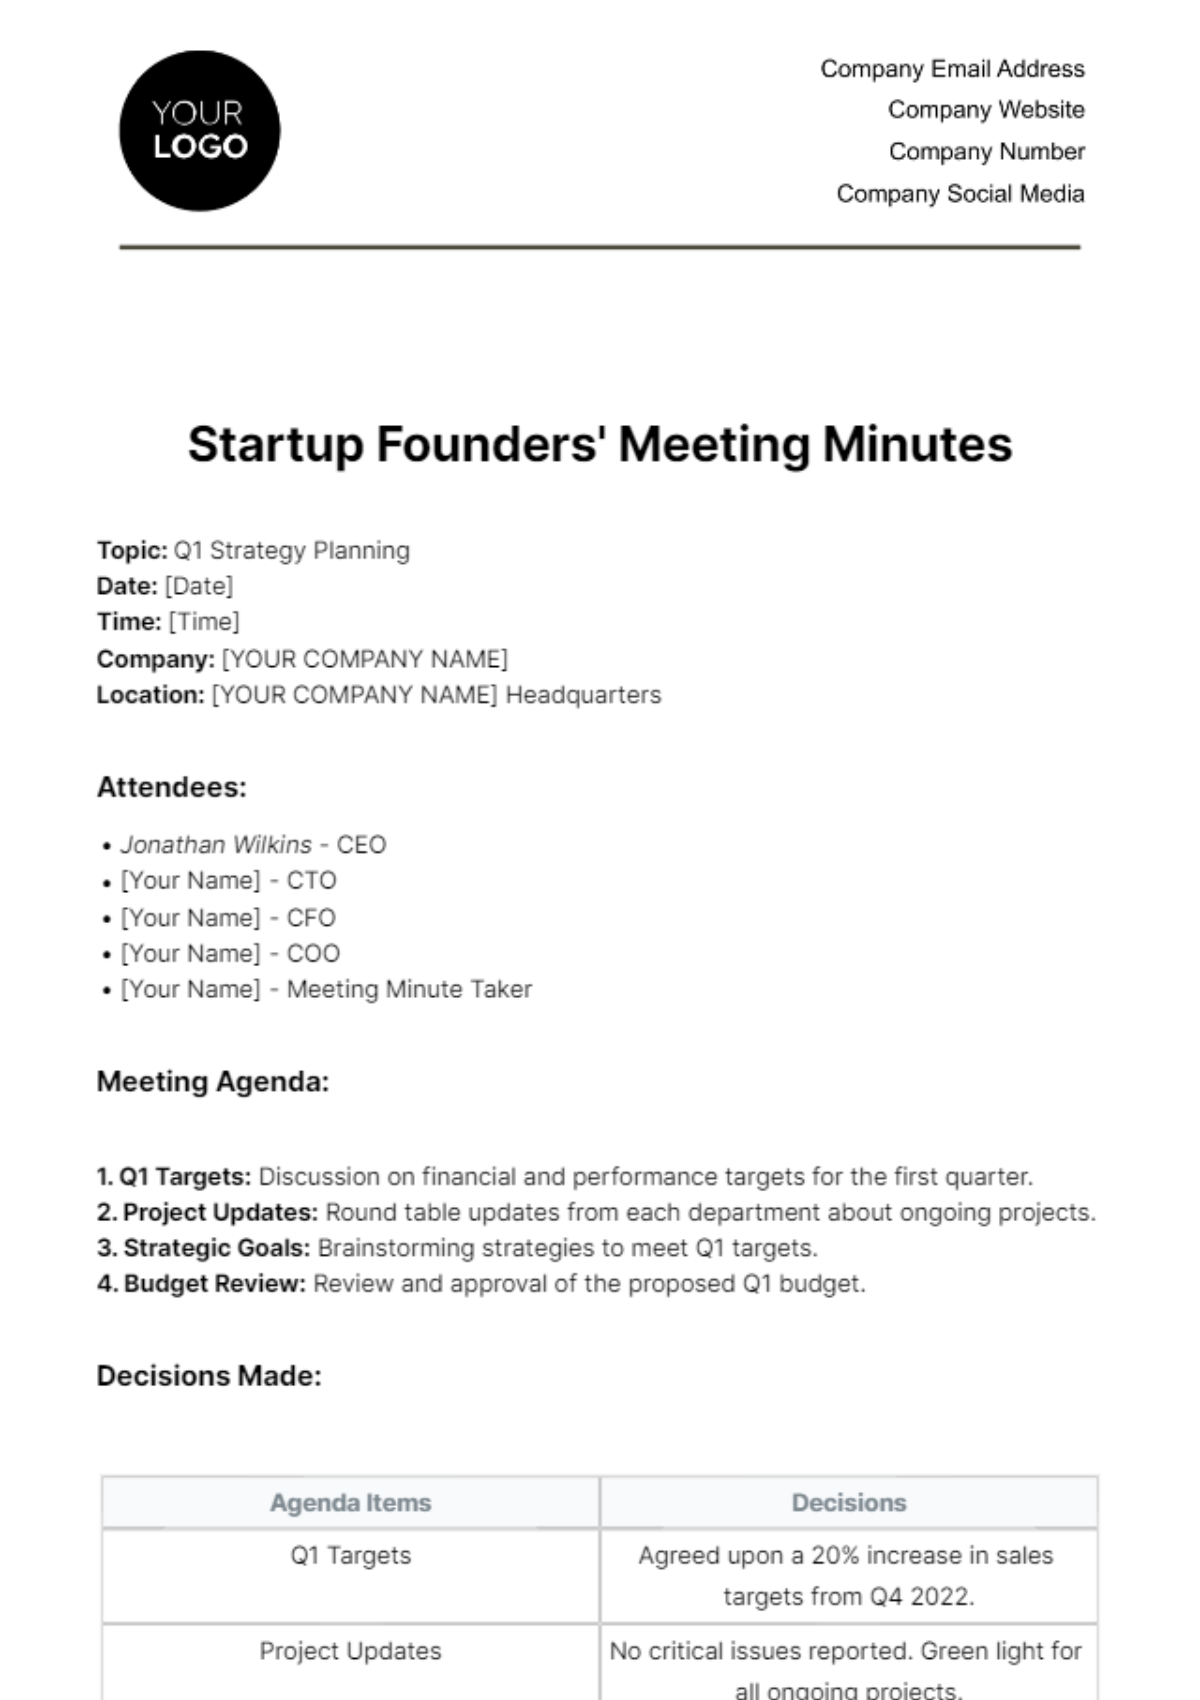 Free Startup Founders' Meeting Minute Template